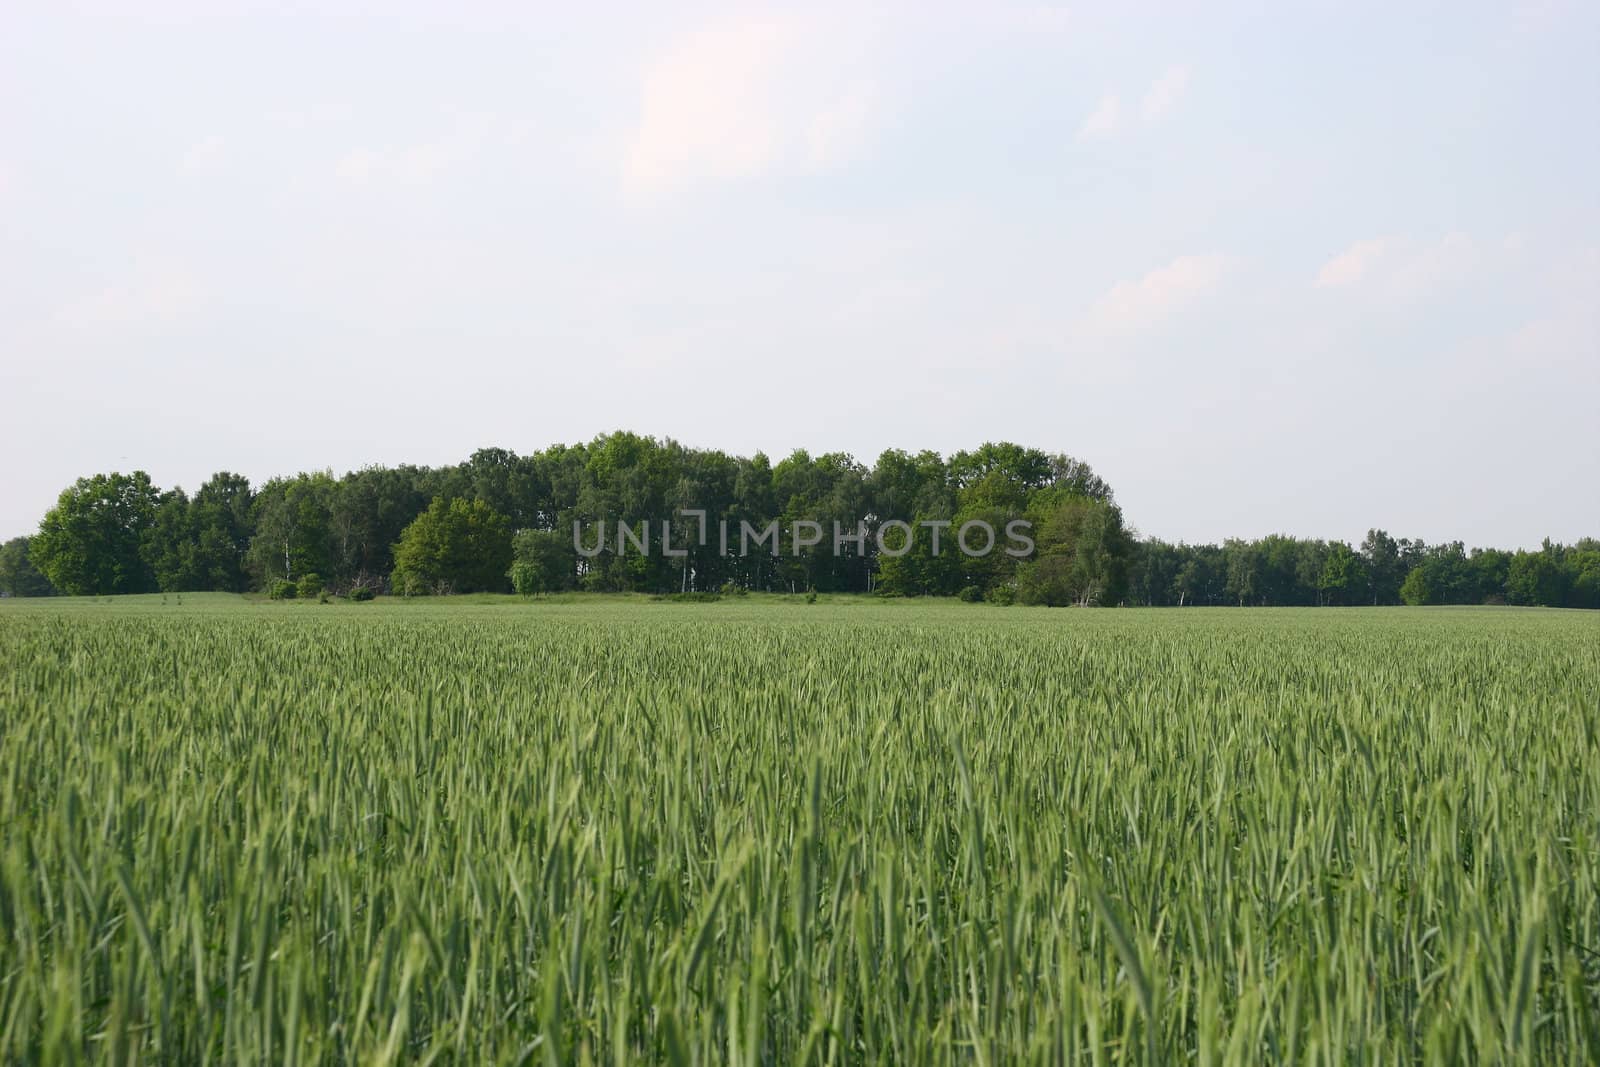 Corn field with one forest island